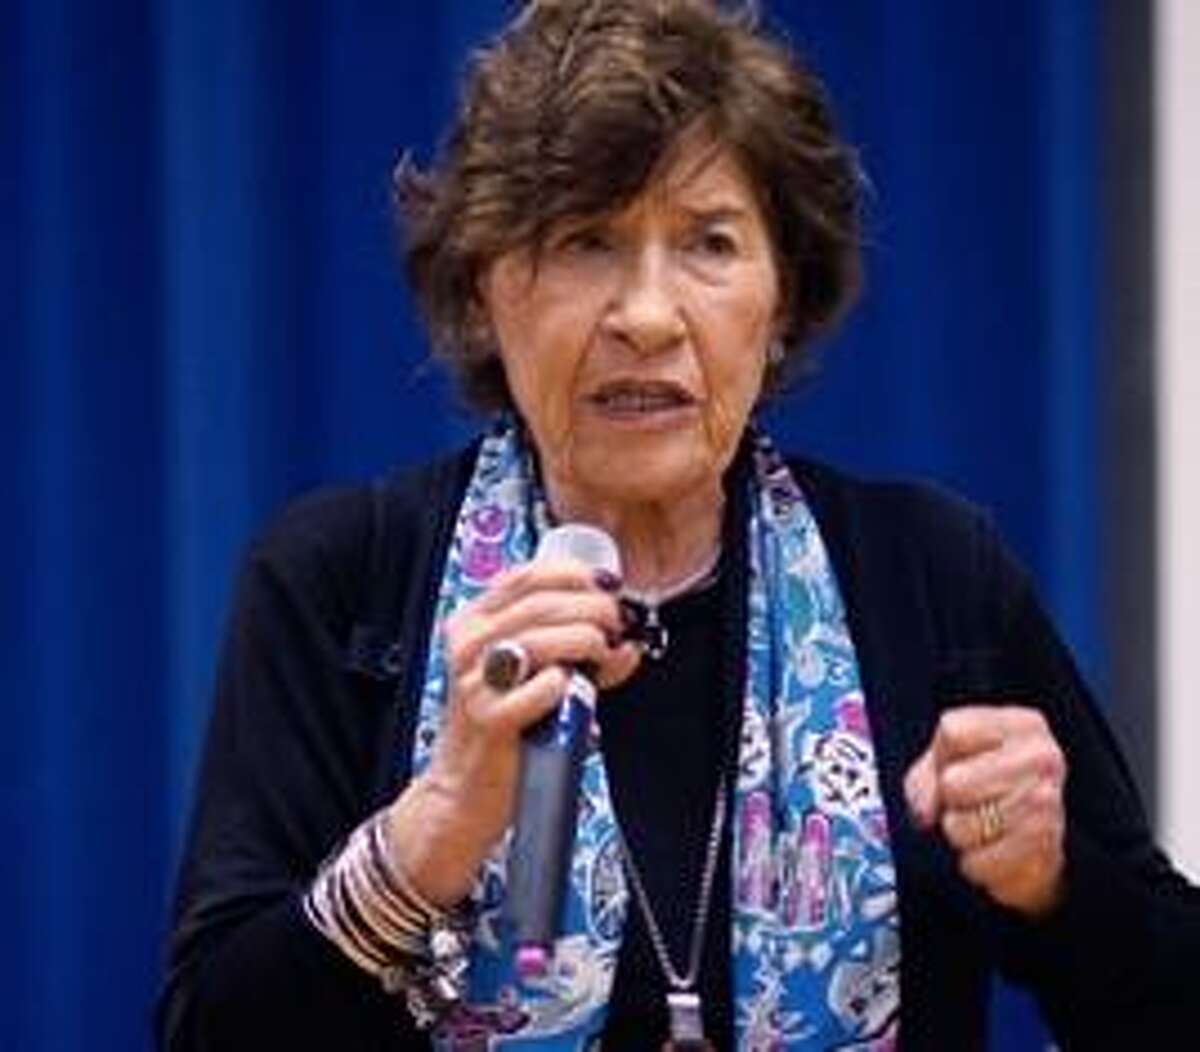 Holocaust survivor Anita Schorr who endured the horrors at Auschwitz as a child, speaks to 5th and 6th graders at Peck Place School in Orange . Photo- Peter Casolino/New Haven Register 03/19/12